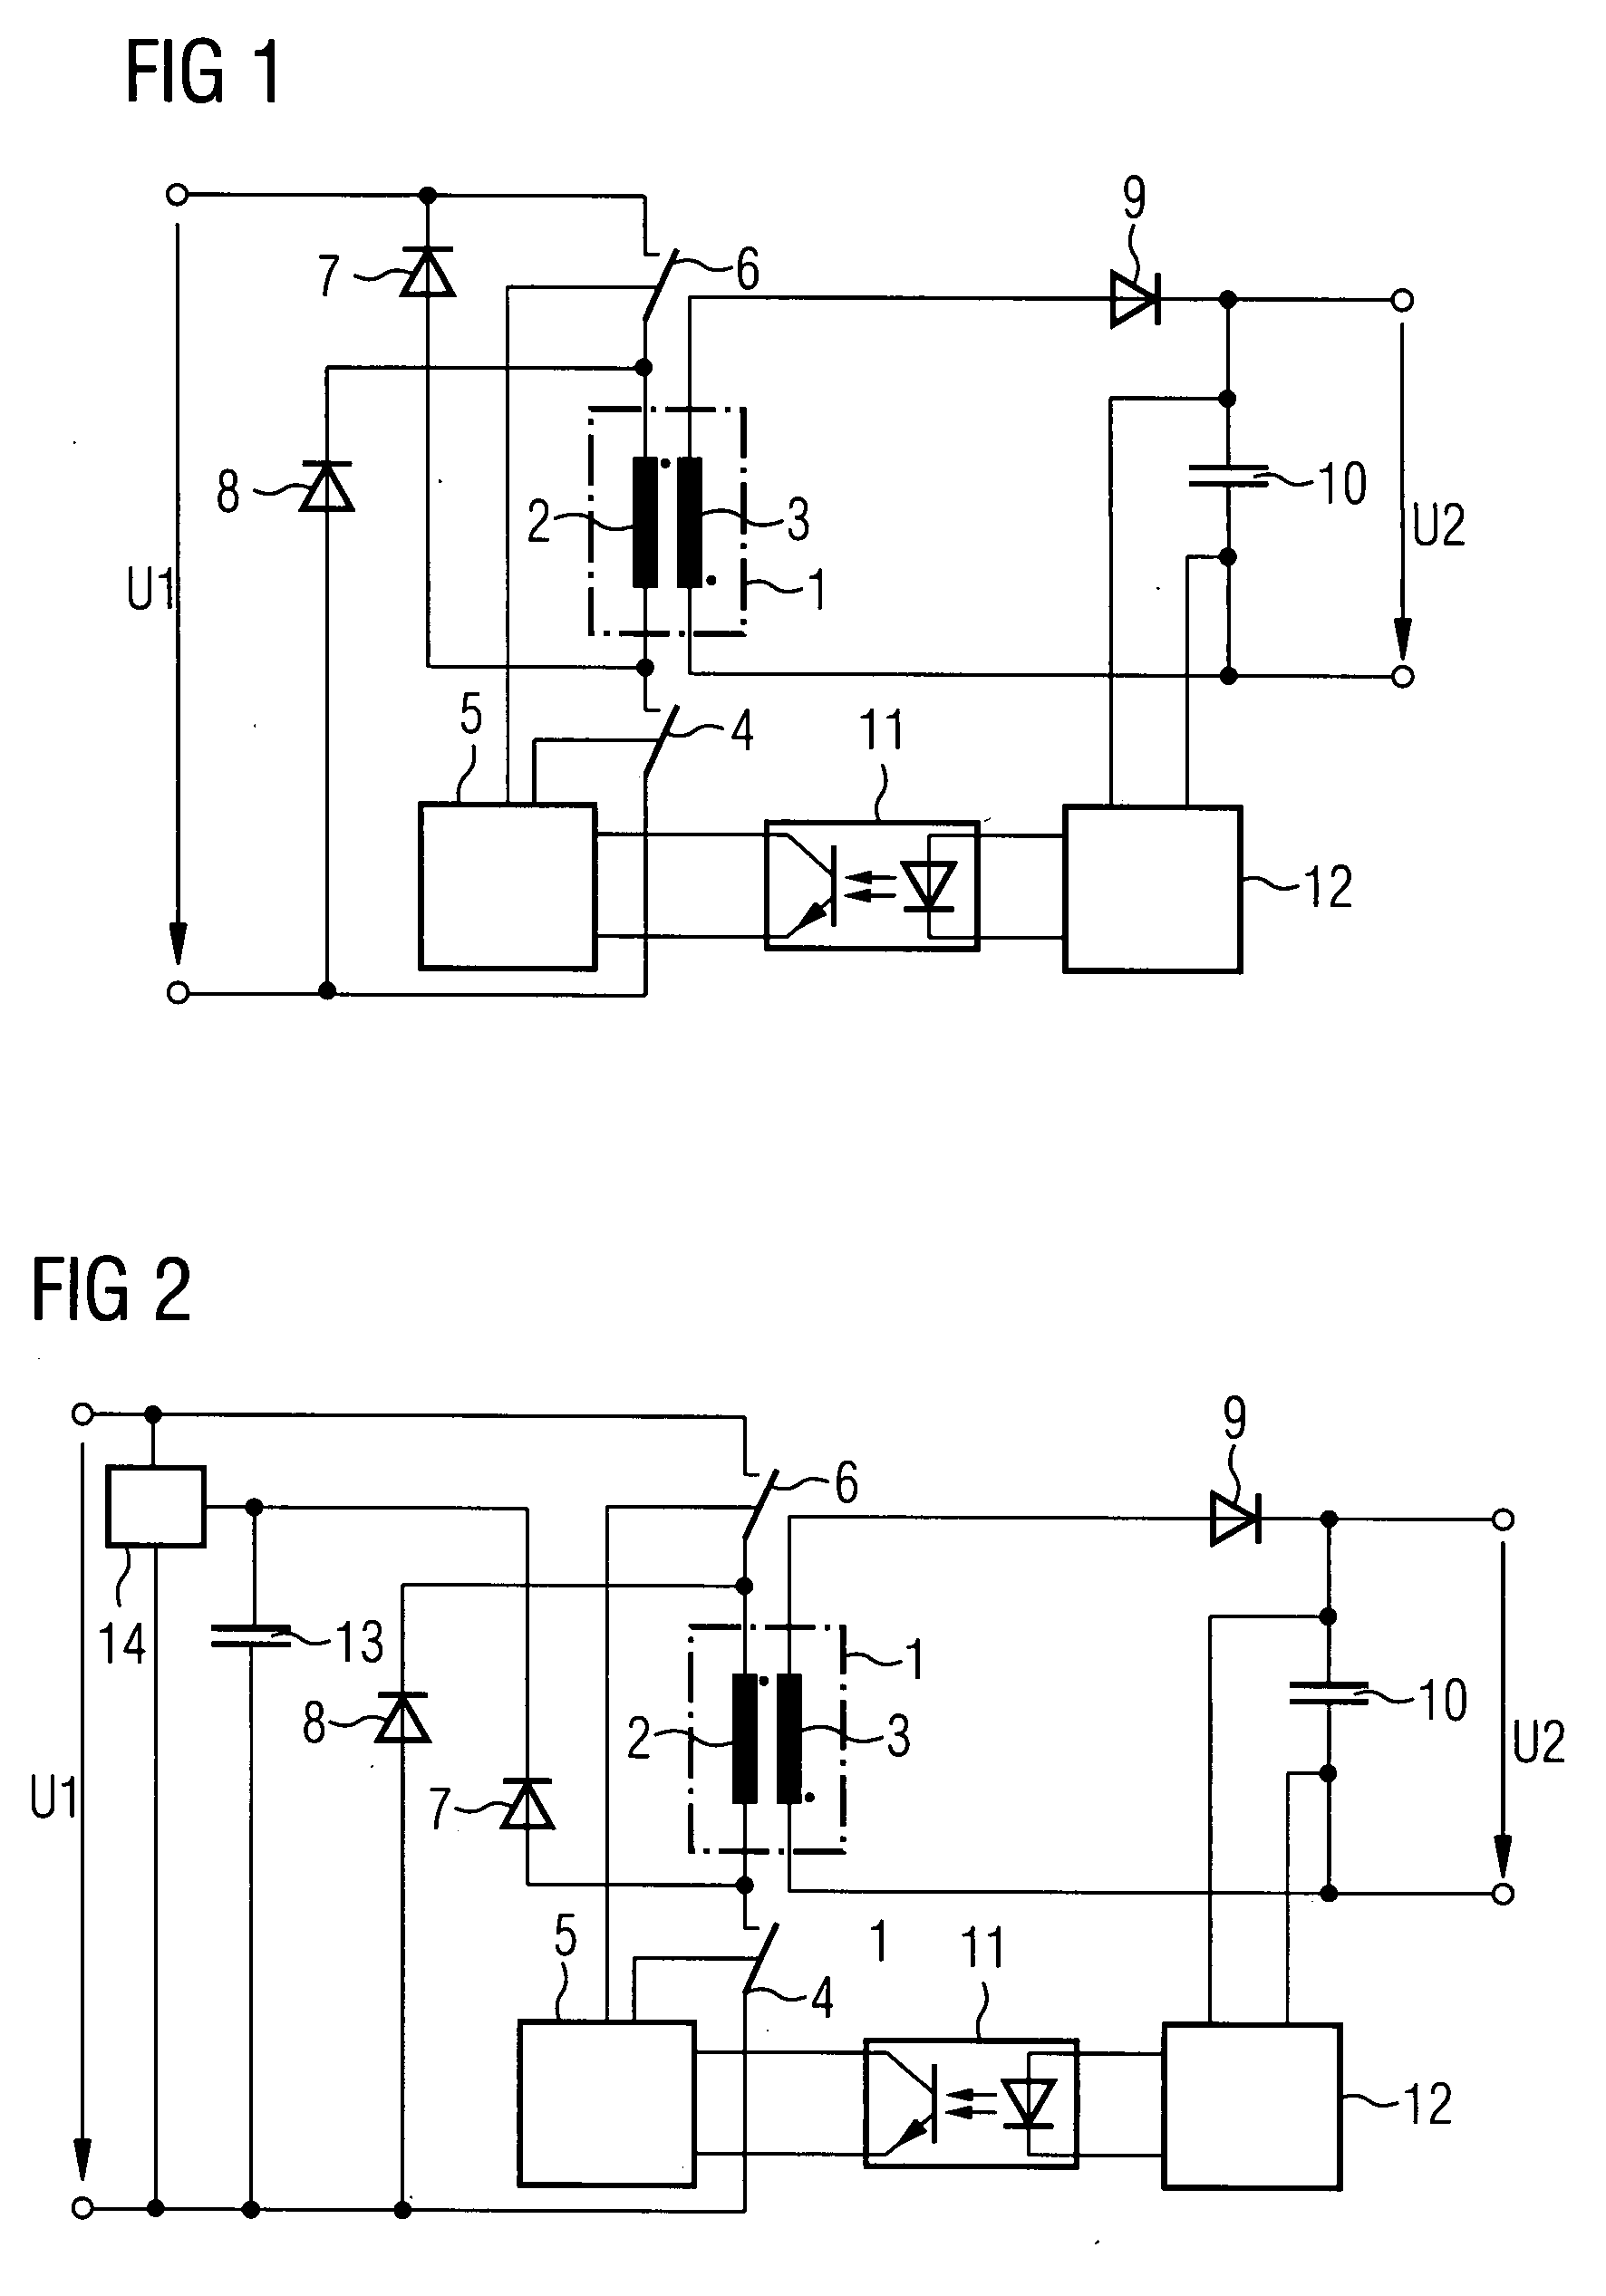 Method for Operating a Switched Mode Power Supply With Return of Primary-Side Stray Energy